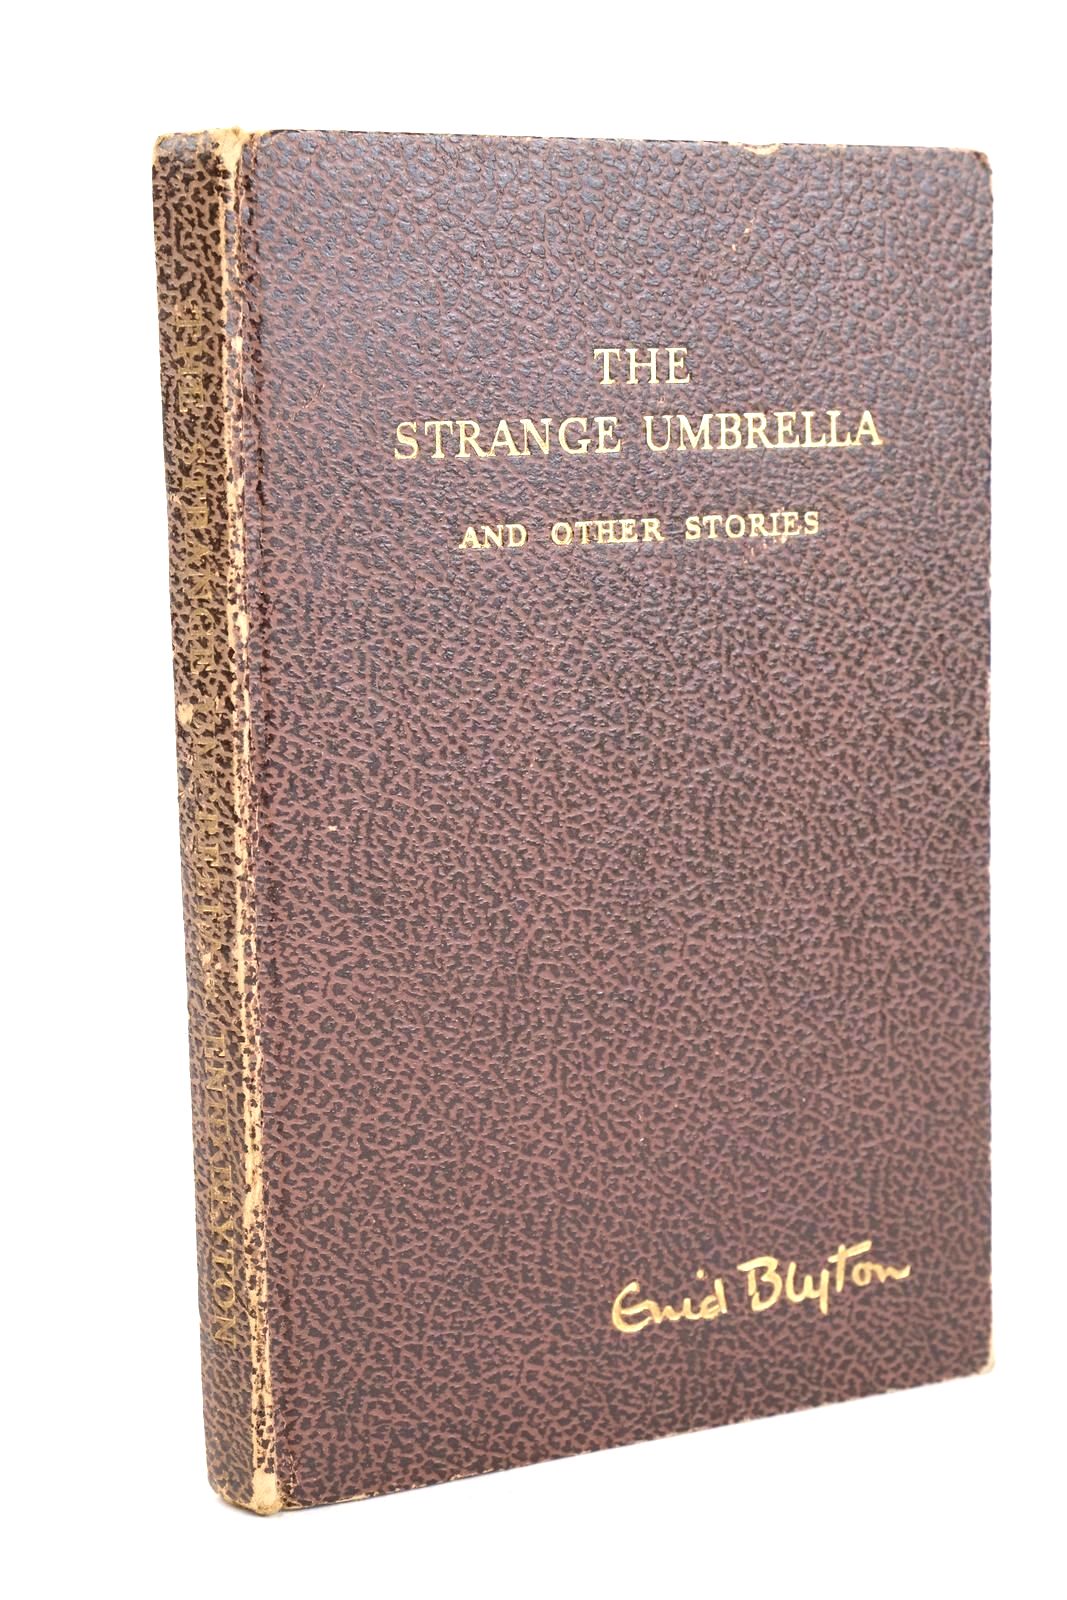 Photo of THE STRANGE UMBRELLA AND OTHER STORIES written by Blyton, Enid published by H.A. and W.L. Pitkin Ltd. (STOCK CODE: 1326782)  for sale by Stella & Rose's Books